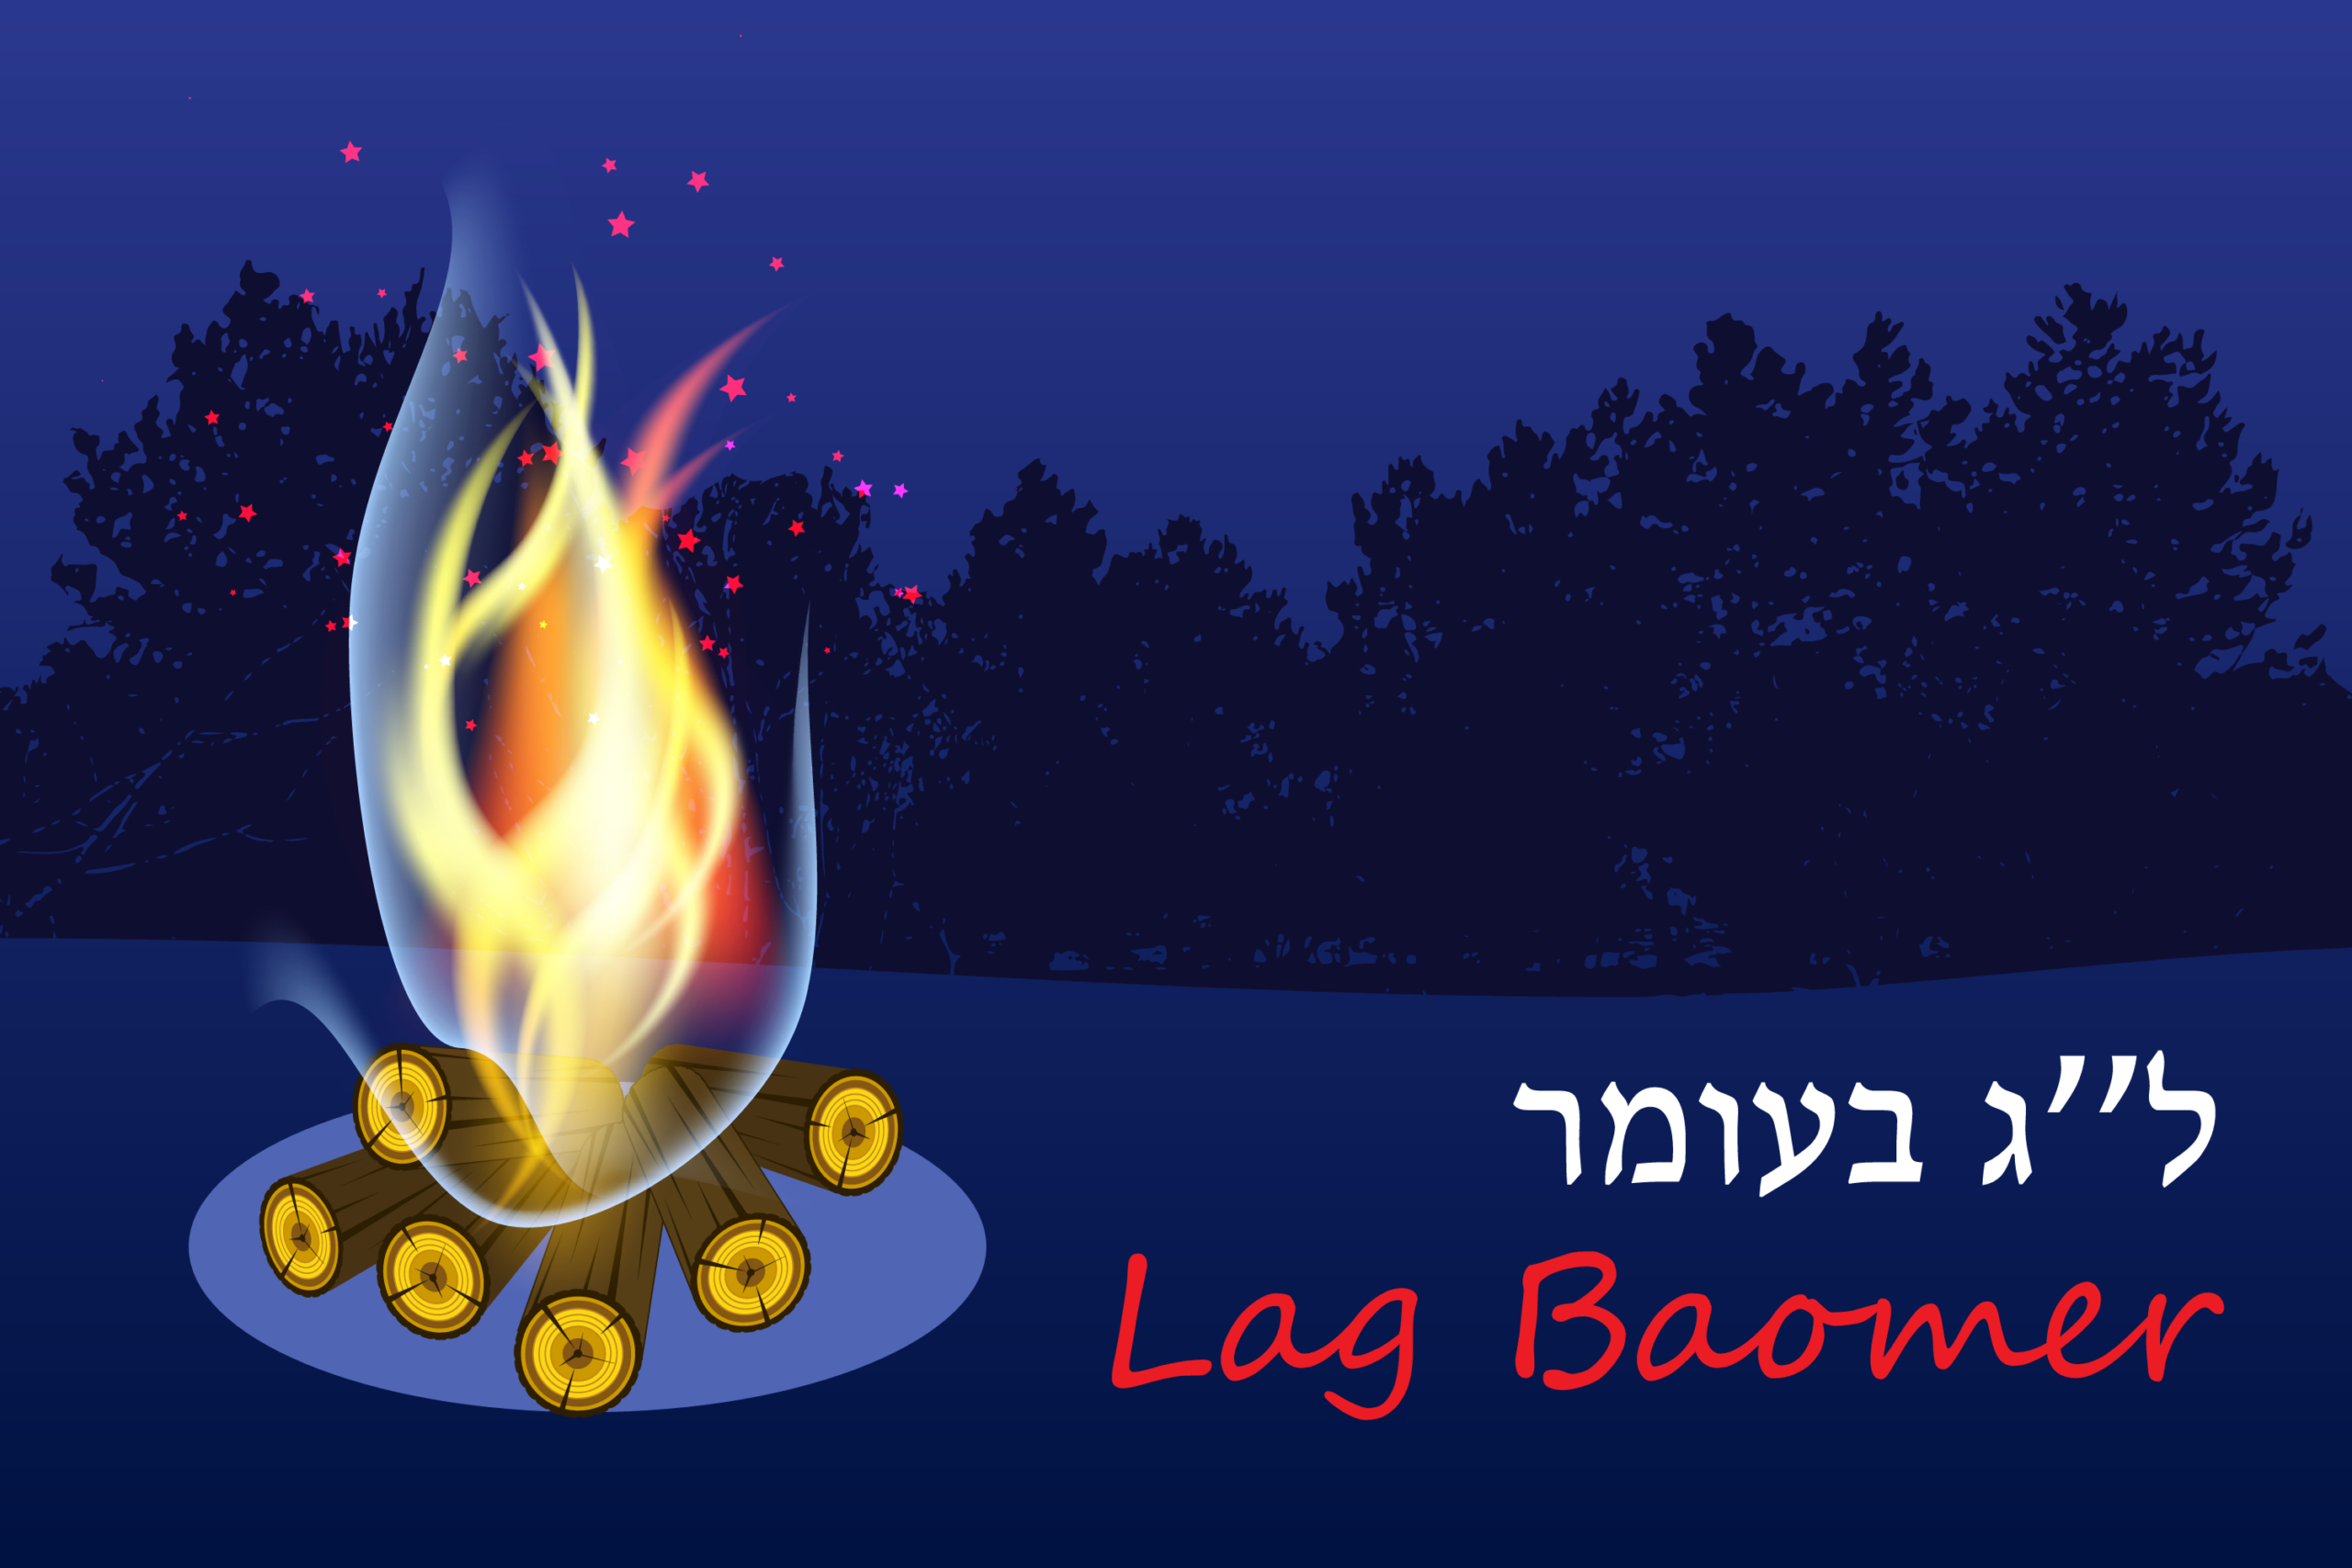 Lag Baomer text and picture of flames